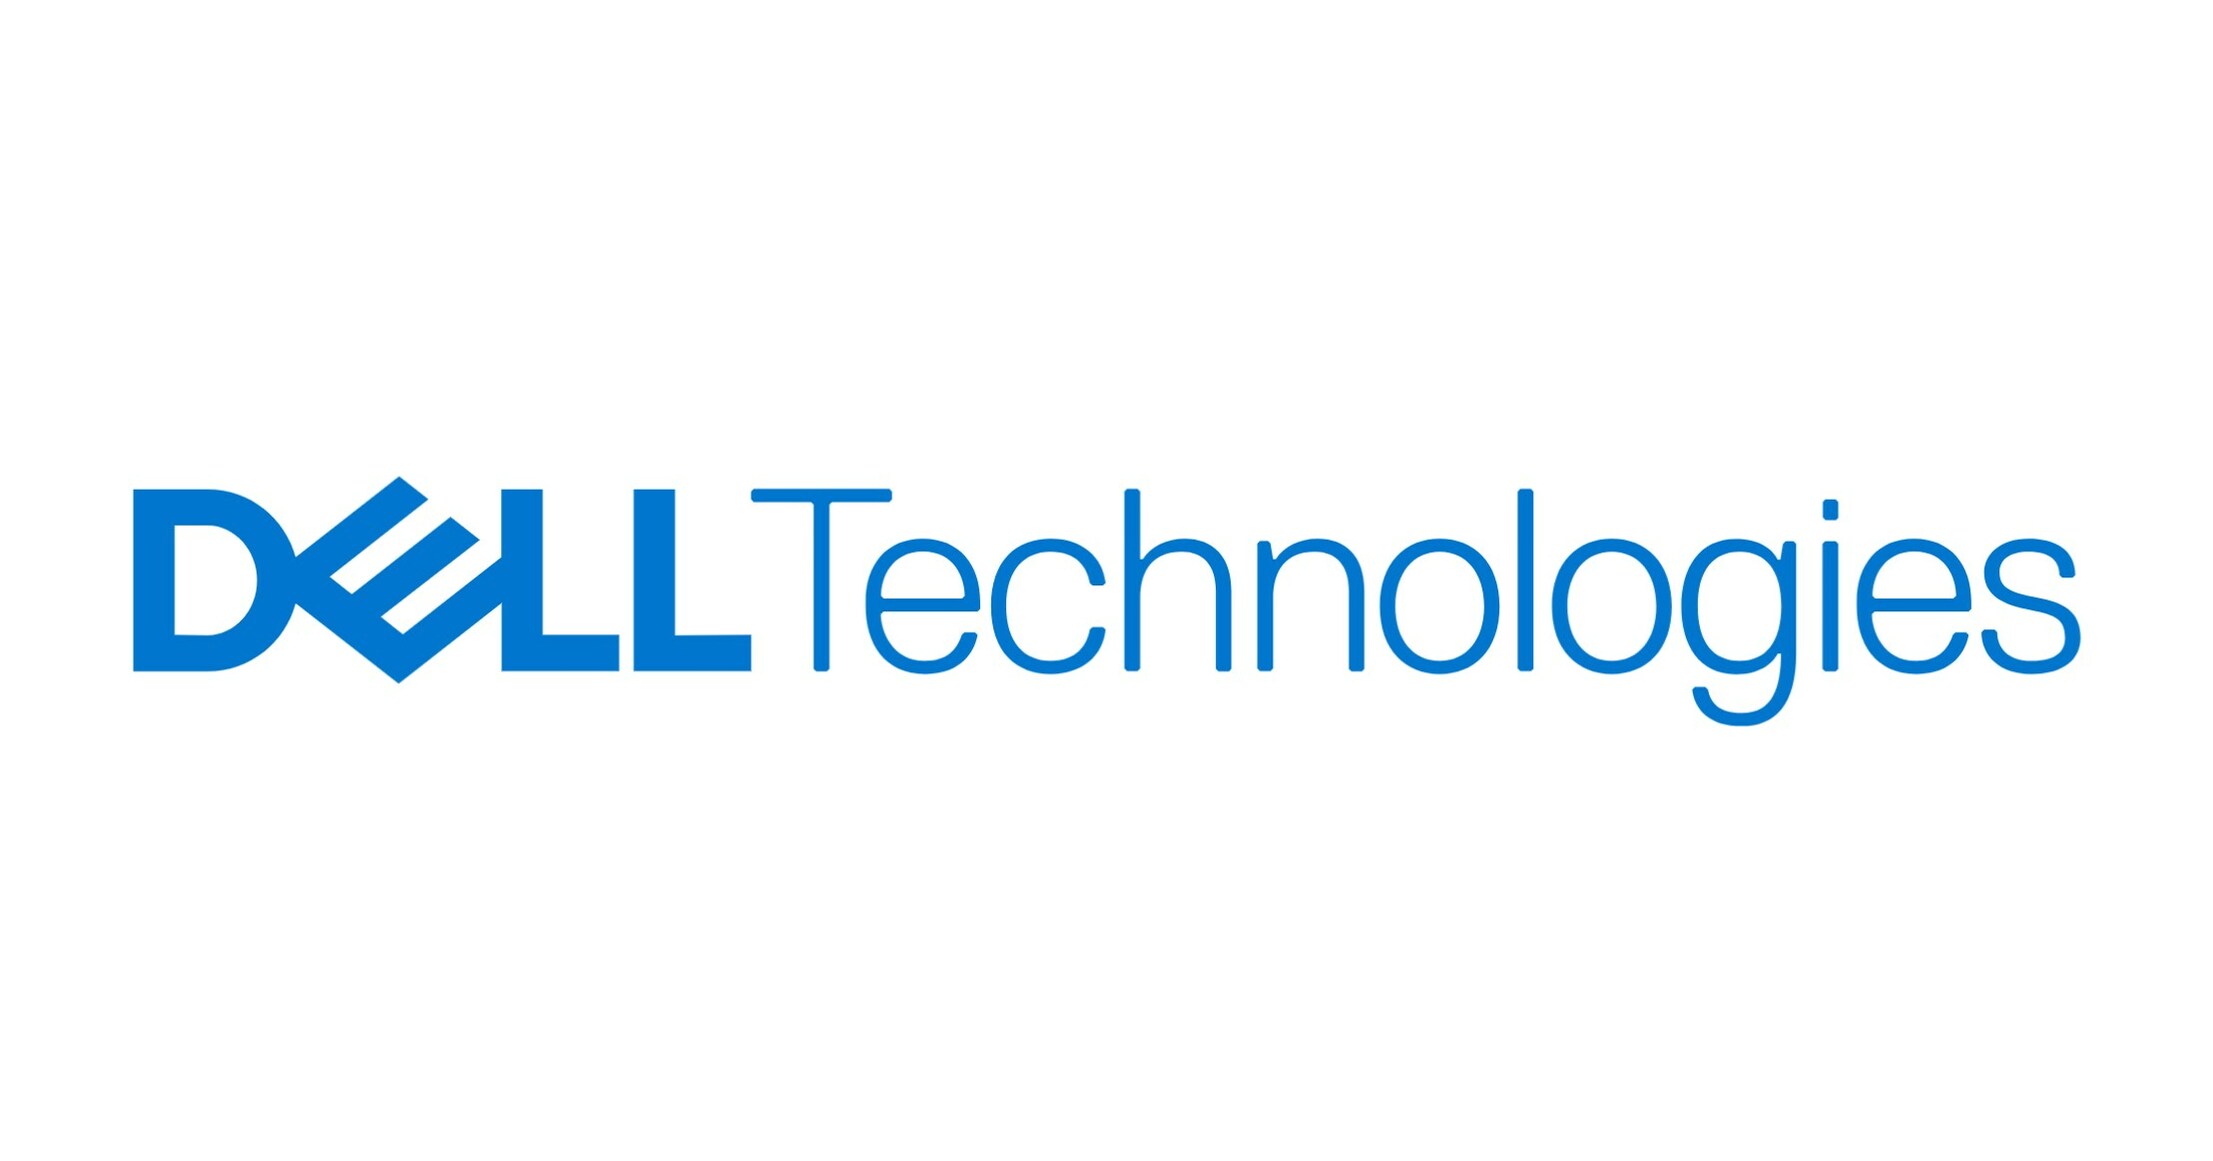 15-facts-about-dell-technologies